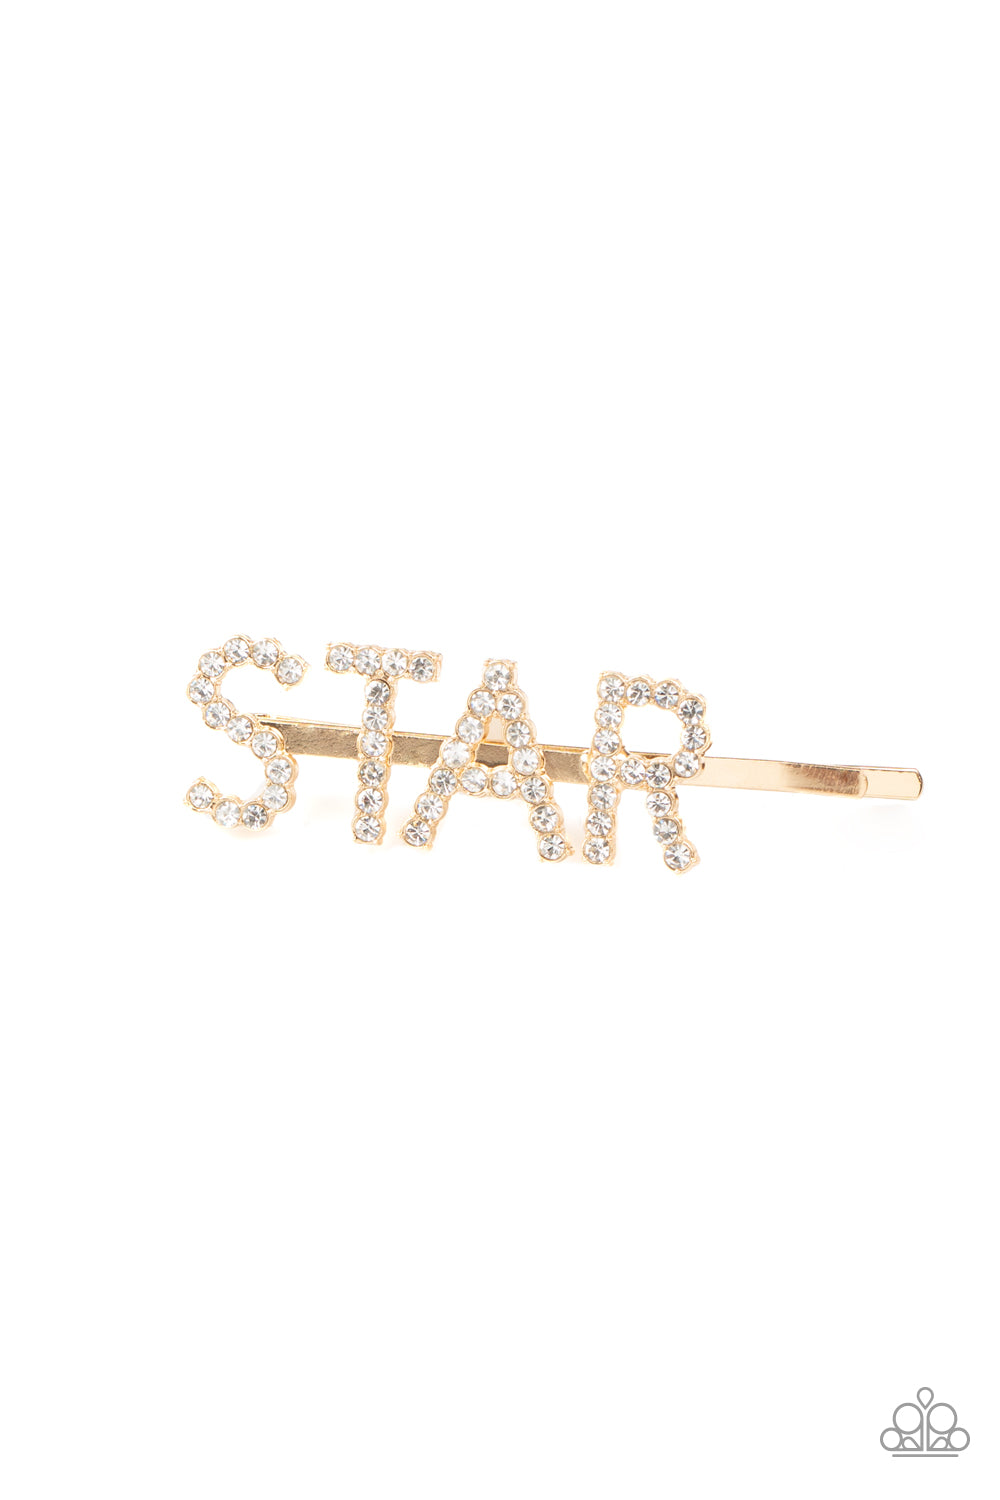 &lt;P&gt;Encrusted in glittery white rhinestones, glistening gold letters spell out the word, \&quot;STAR,\&quot; across the front of a gold bobby pin for a stellar look.&lt;/P&gt;

&lt;P&gt;&lt;I&gt;Sold as one individual hair clip.&lt;/I&gt;&lt;/P&gt;


&lt;img src=\&quot;https://d9b54x484lq62.cloudfront.net/paparazzi/shopping/images/517_tag150x115_1.png\&quot; alt=\&quot;New Kit\&quot; align=\&quot;middle\&quot; height=\&quot;50\&quot; width=\&quot;50\&quot;/&gt;